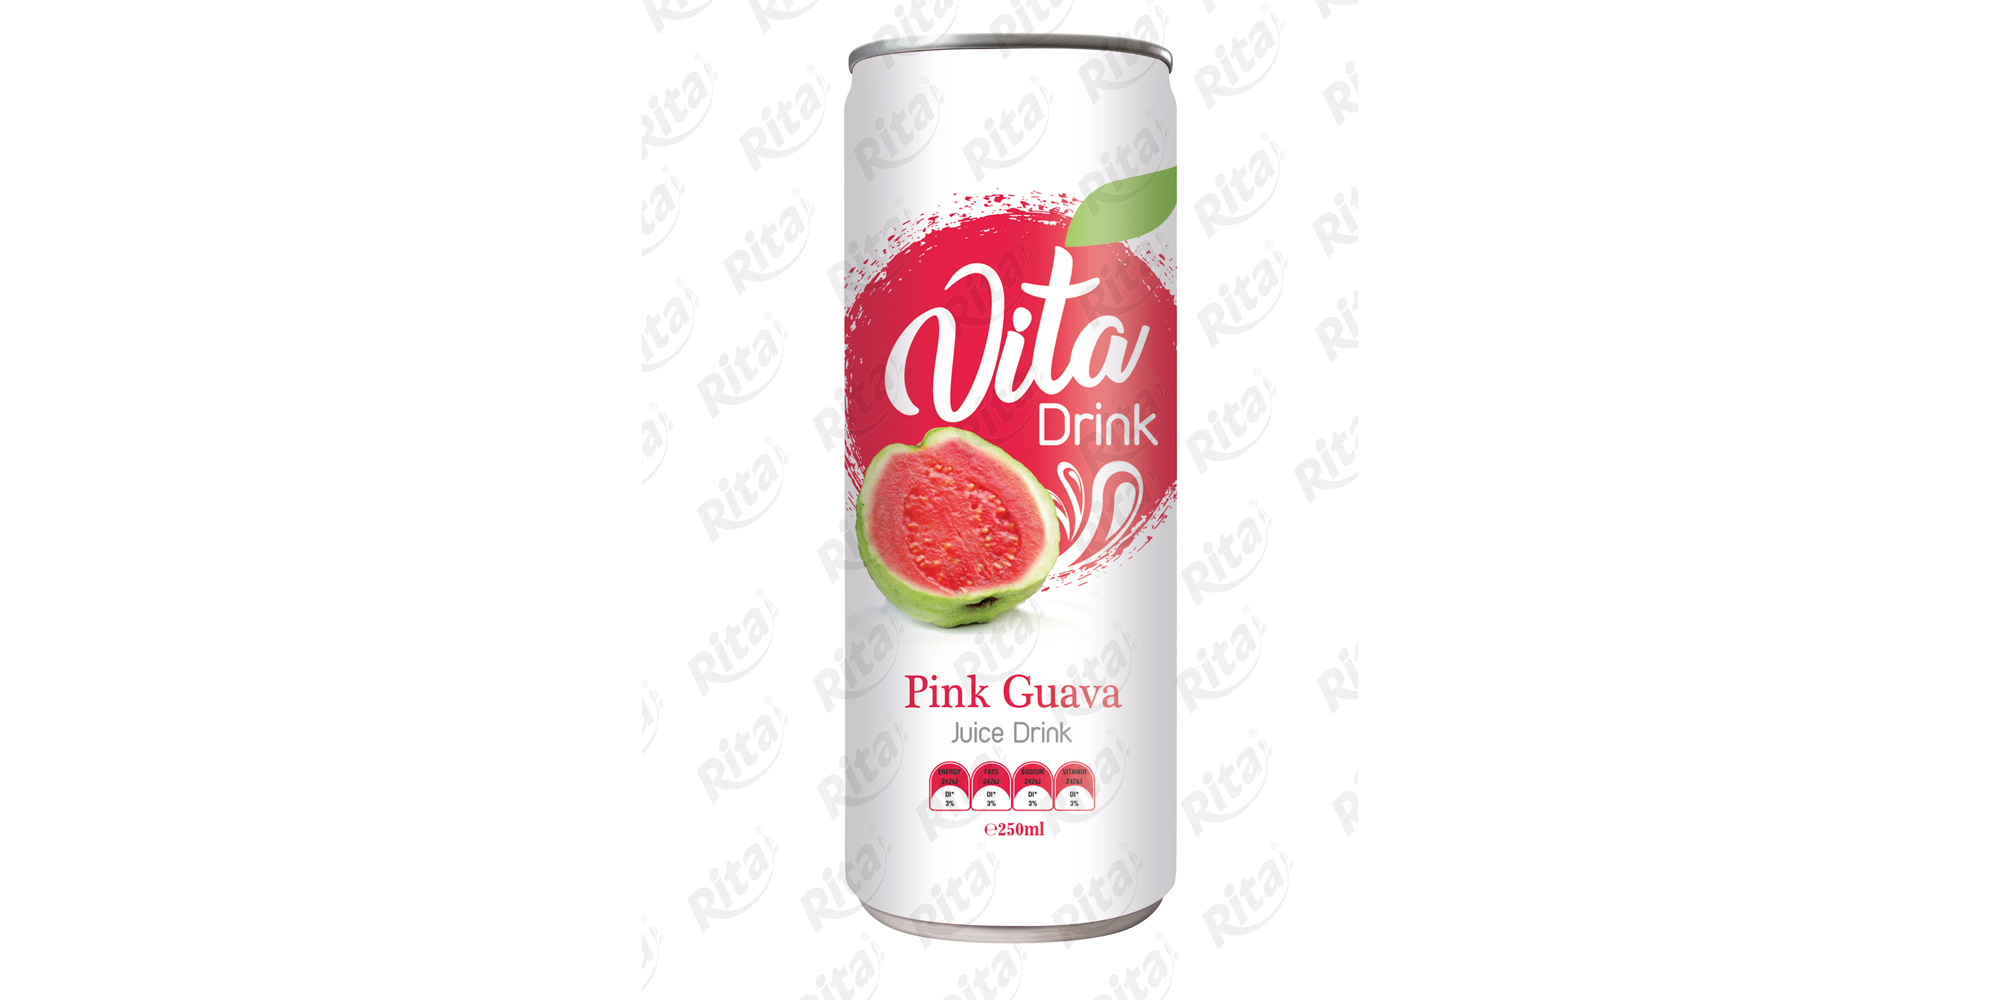 pink guava juice drink 250ml from RITA India